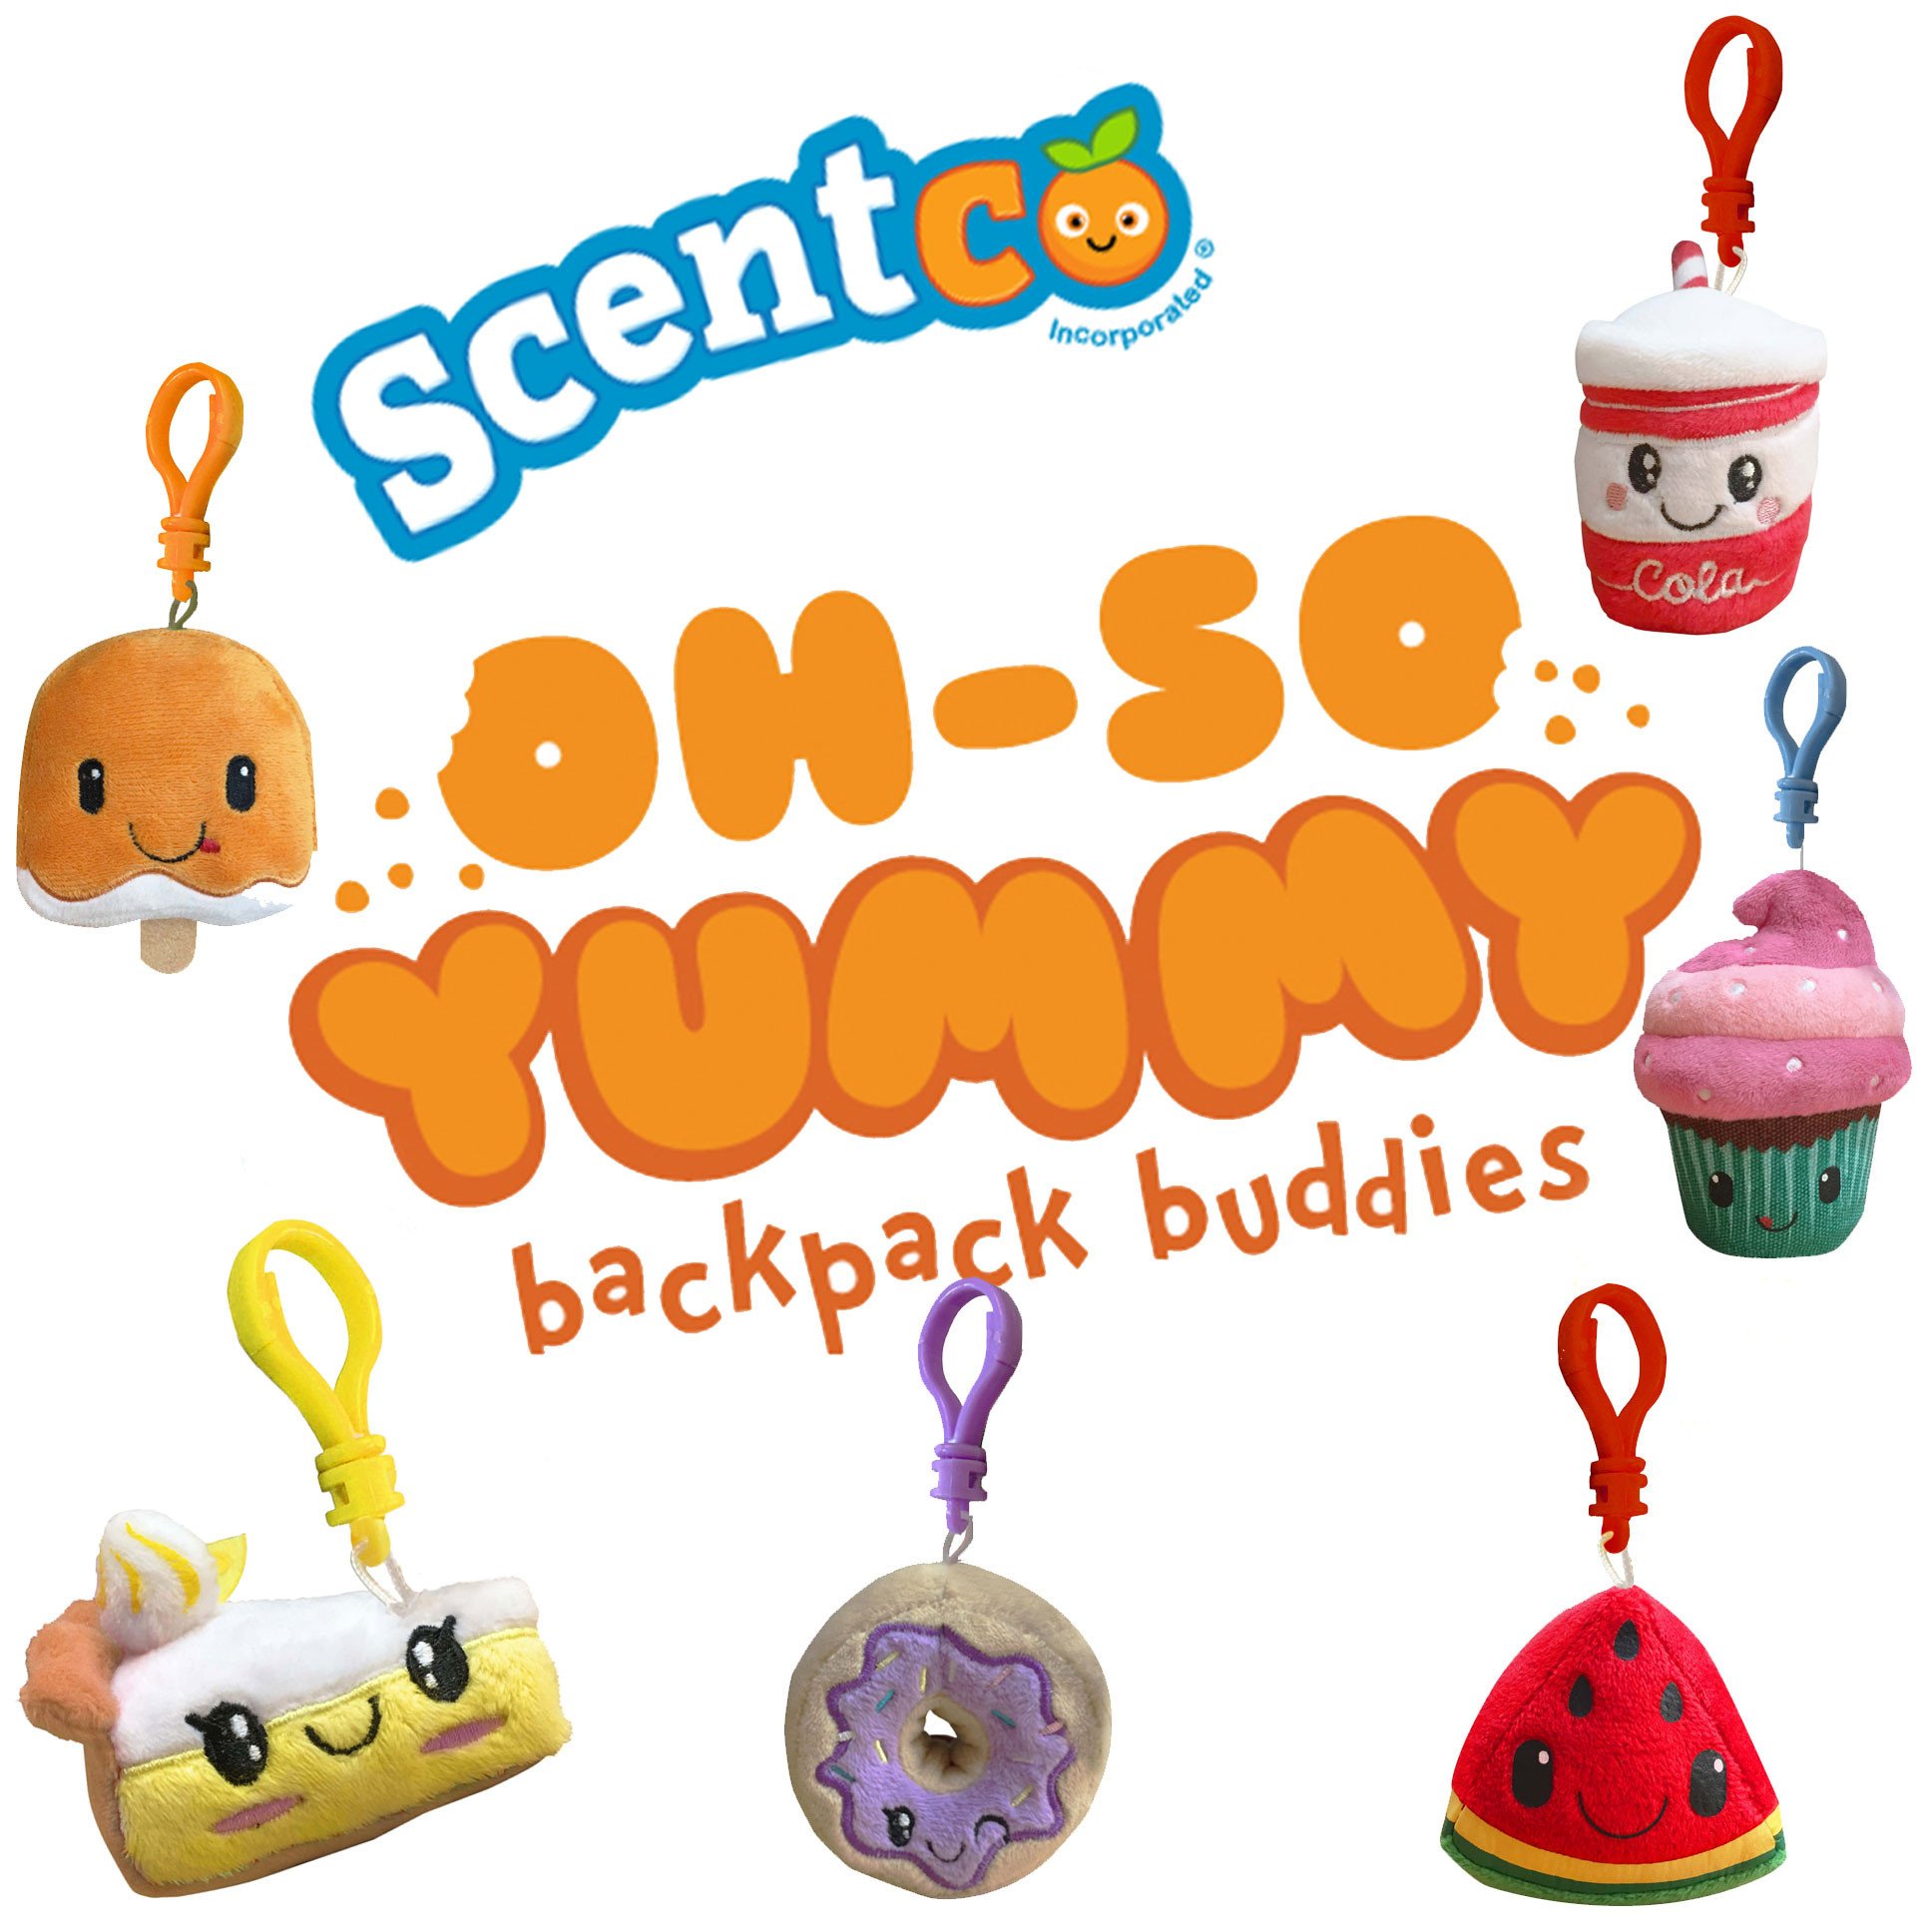 Oh-So Yummy Scented Backpack Buddies – Snyder's Candy